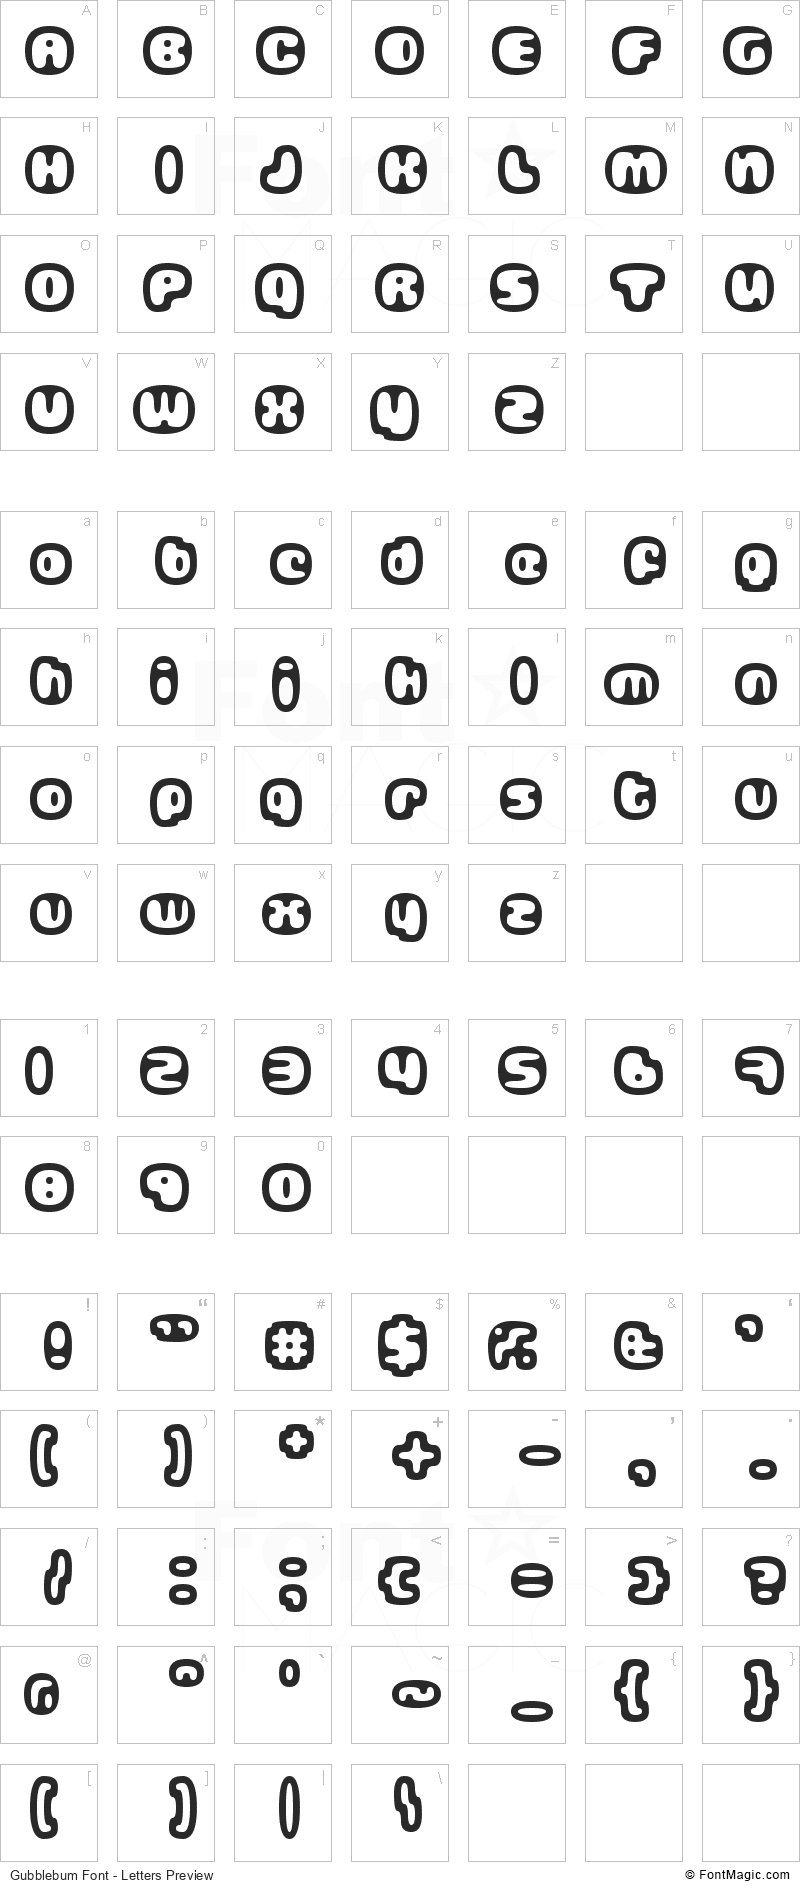 Gubblebum Font - All Latters Preview Chart